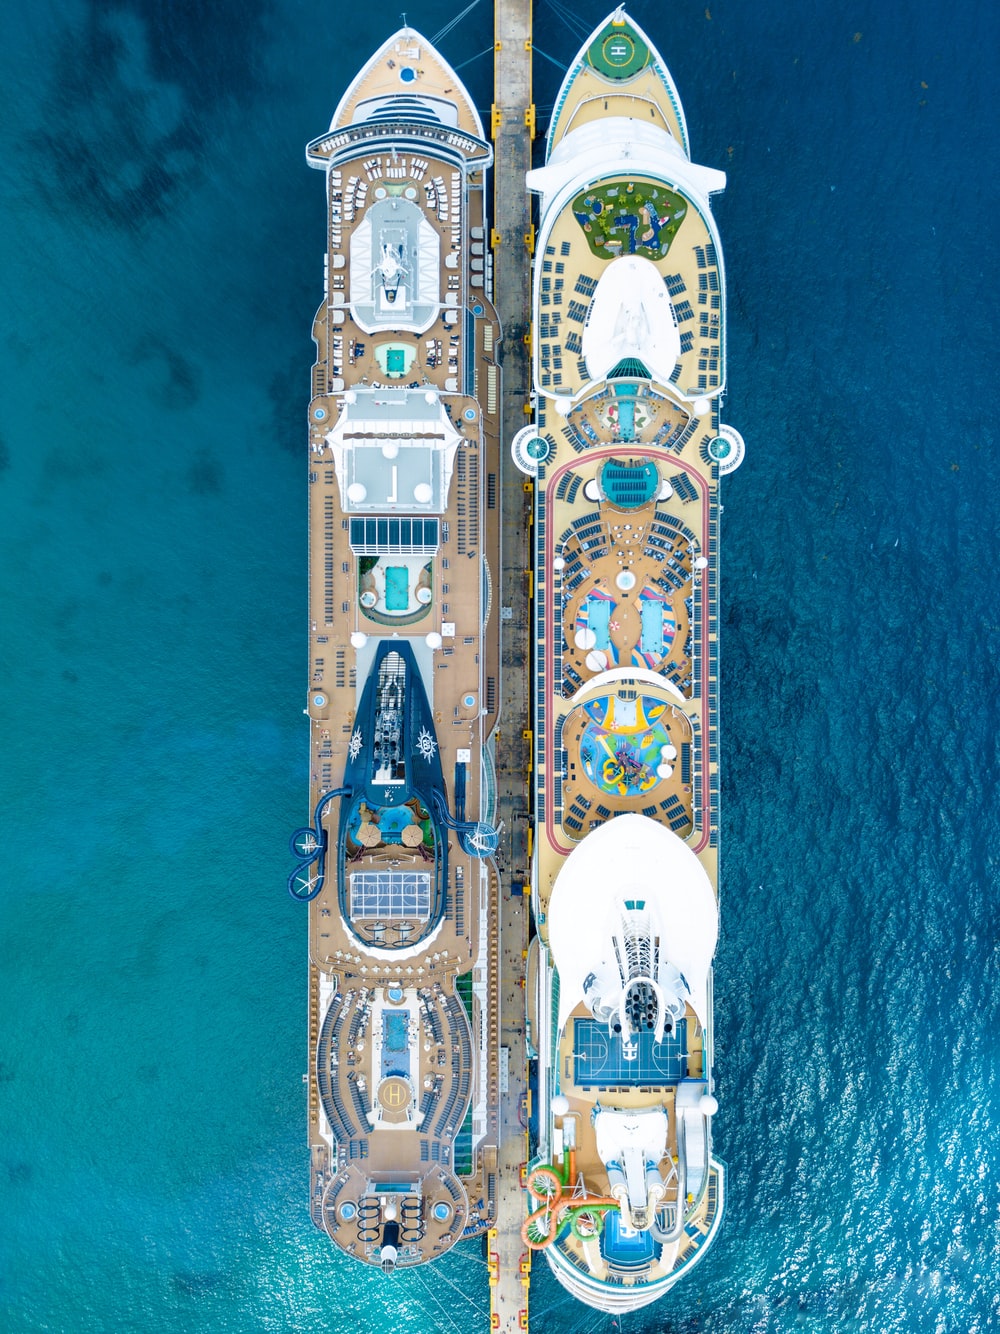 Cruise Picture [HQ]. Download Free Image